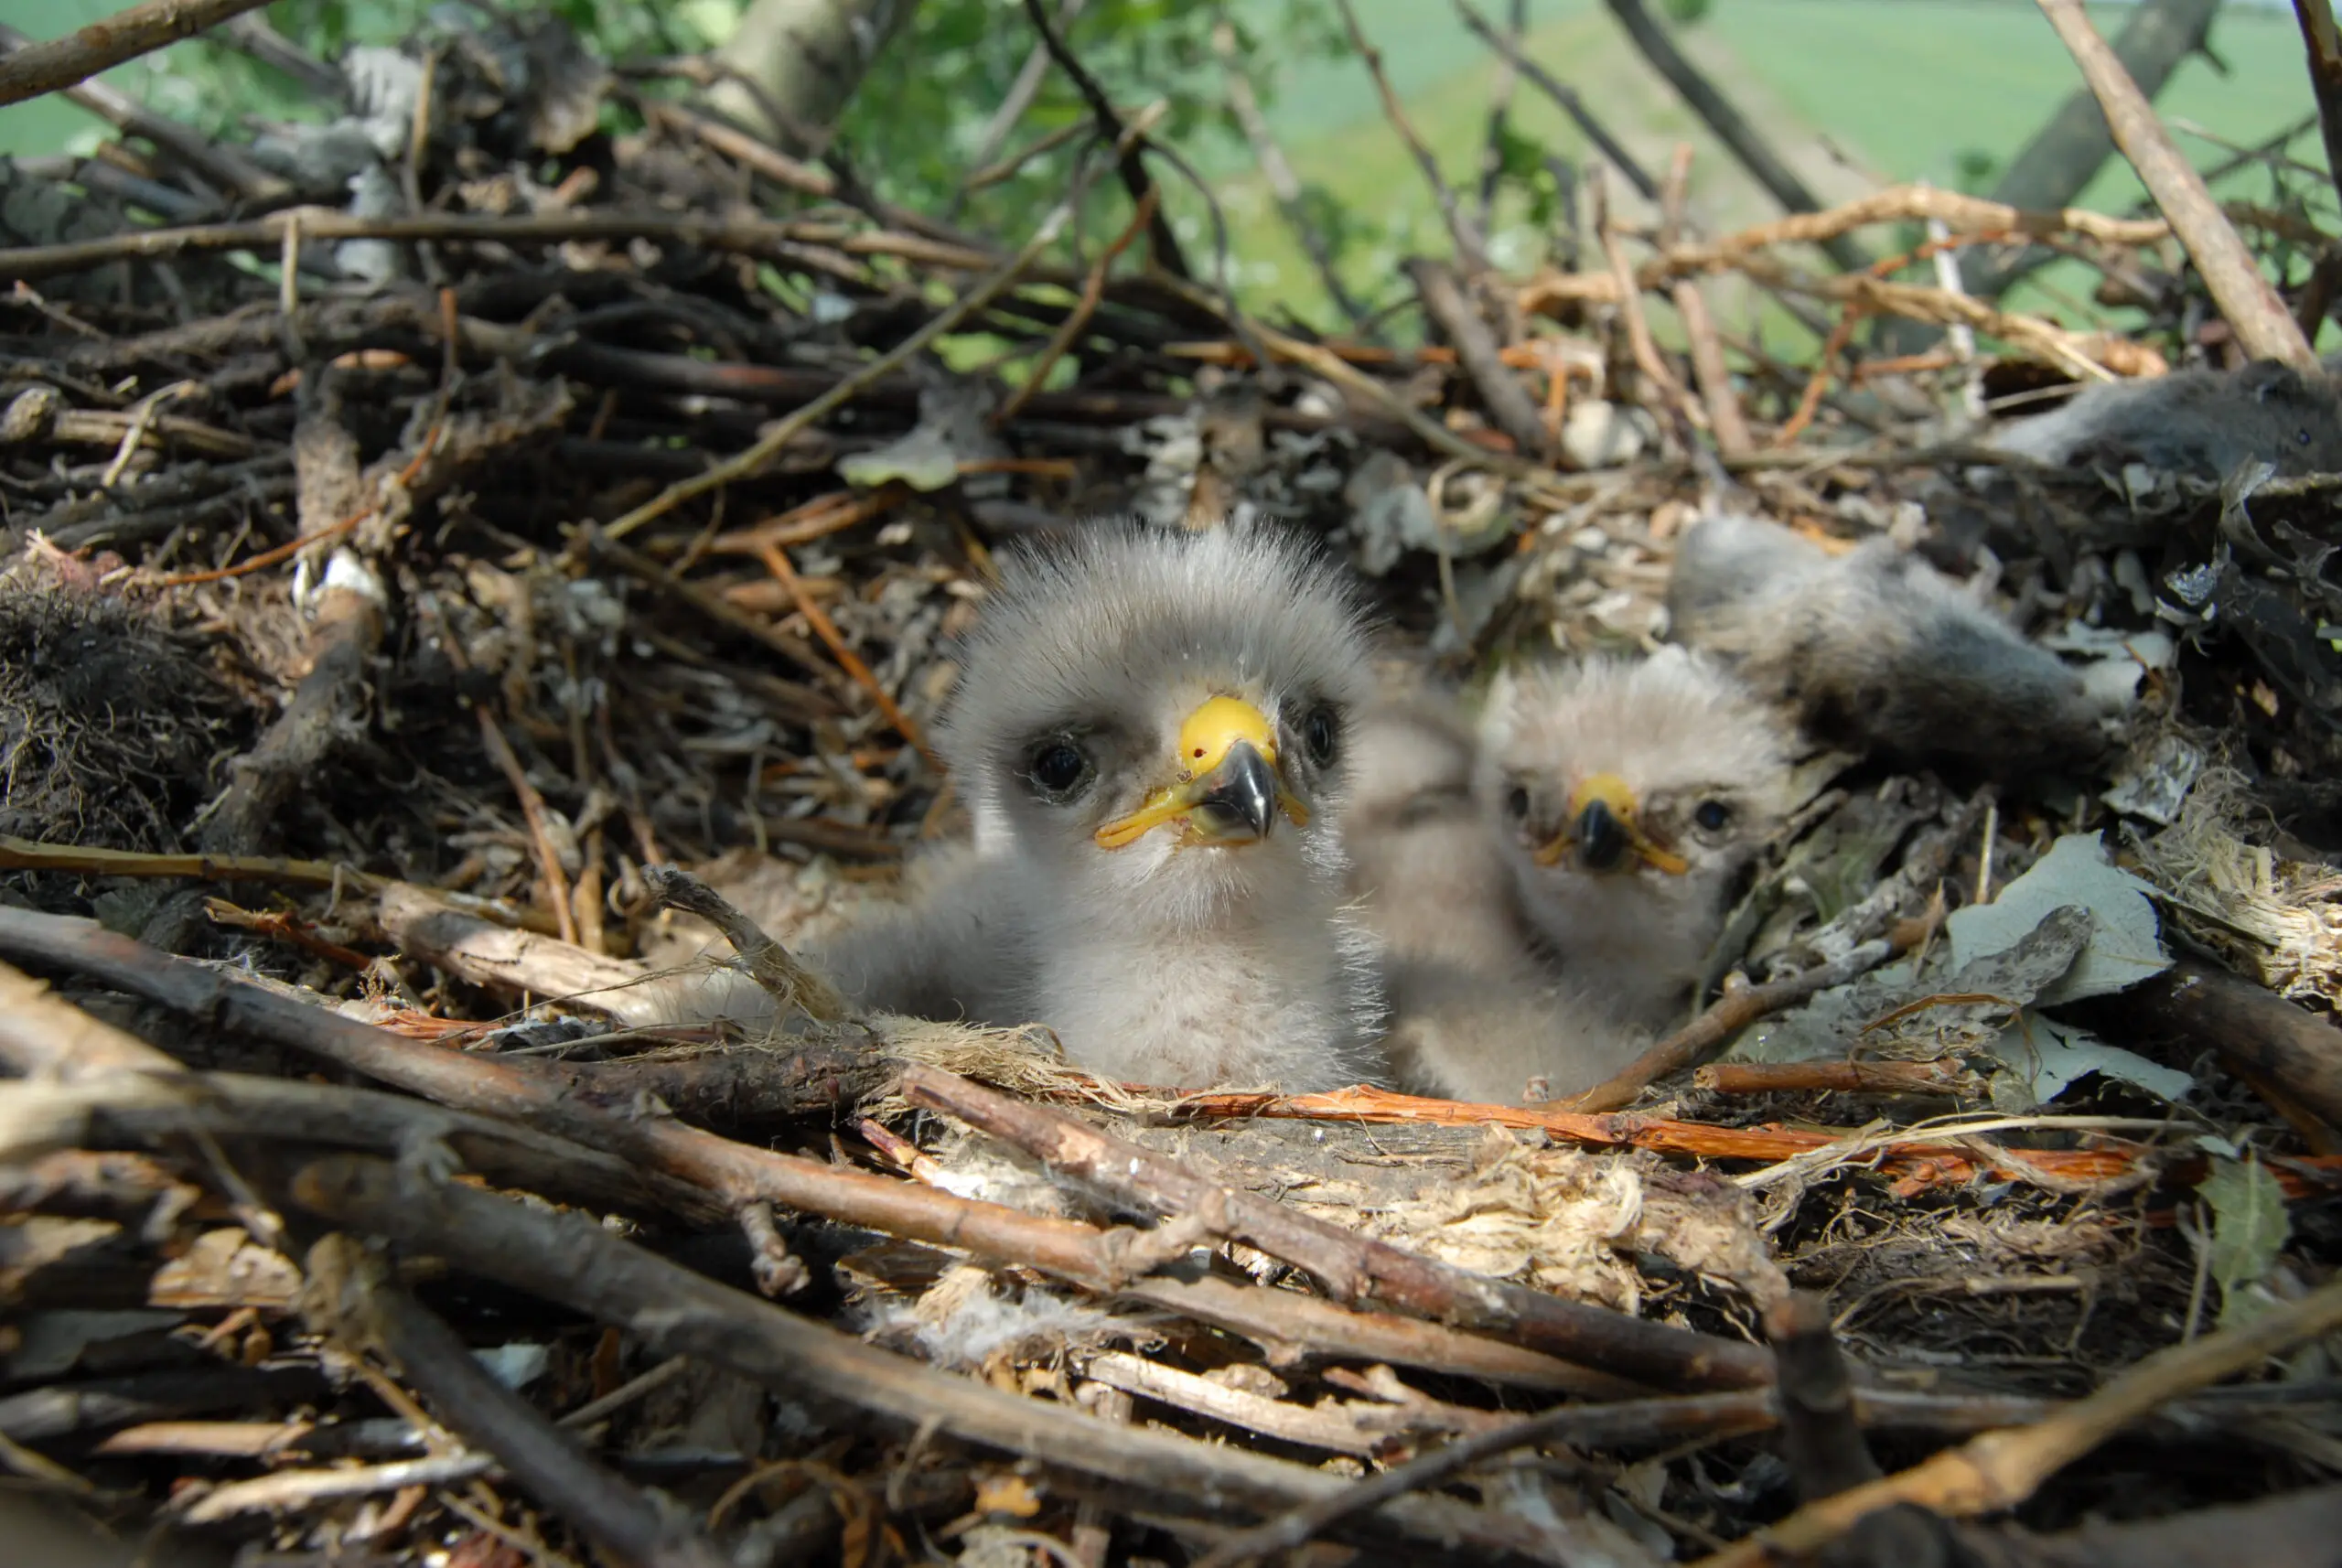 How Long Do Baby Birds Stay In The Nest?